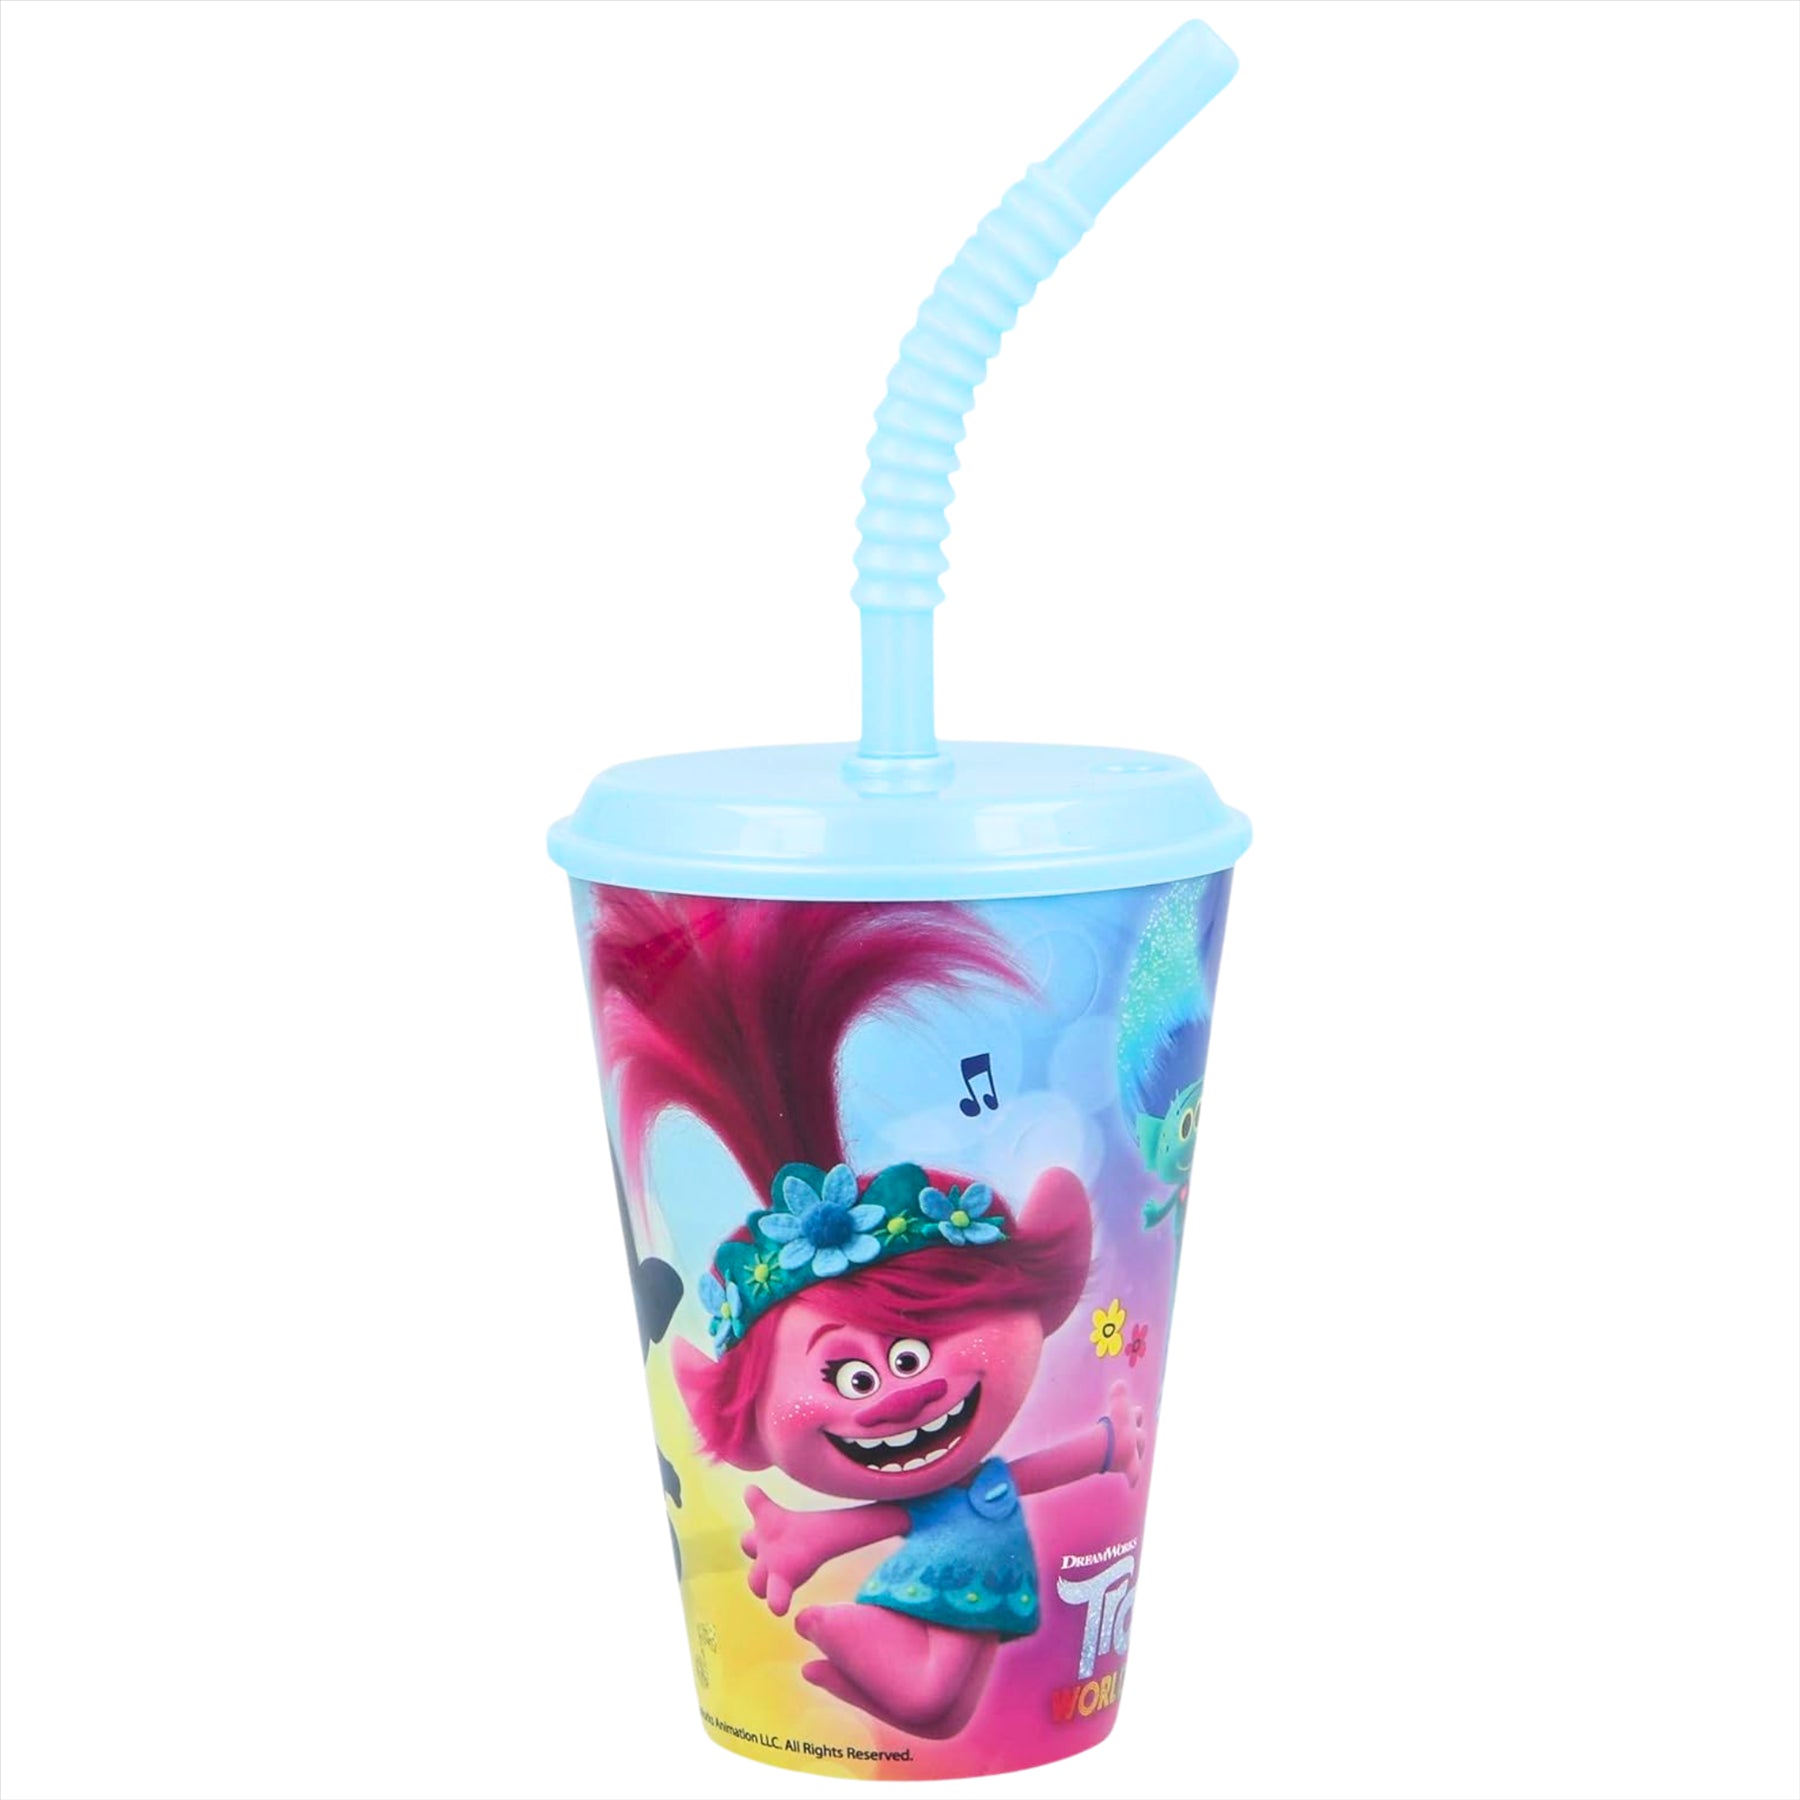 Trolls World Tour Plastic Cup with Straw - 430ml Drinking Cup Tumbler with Lid - Toptoys2u